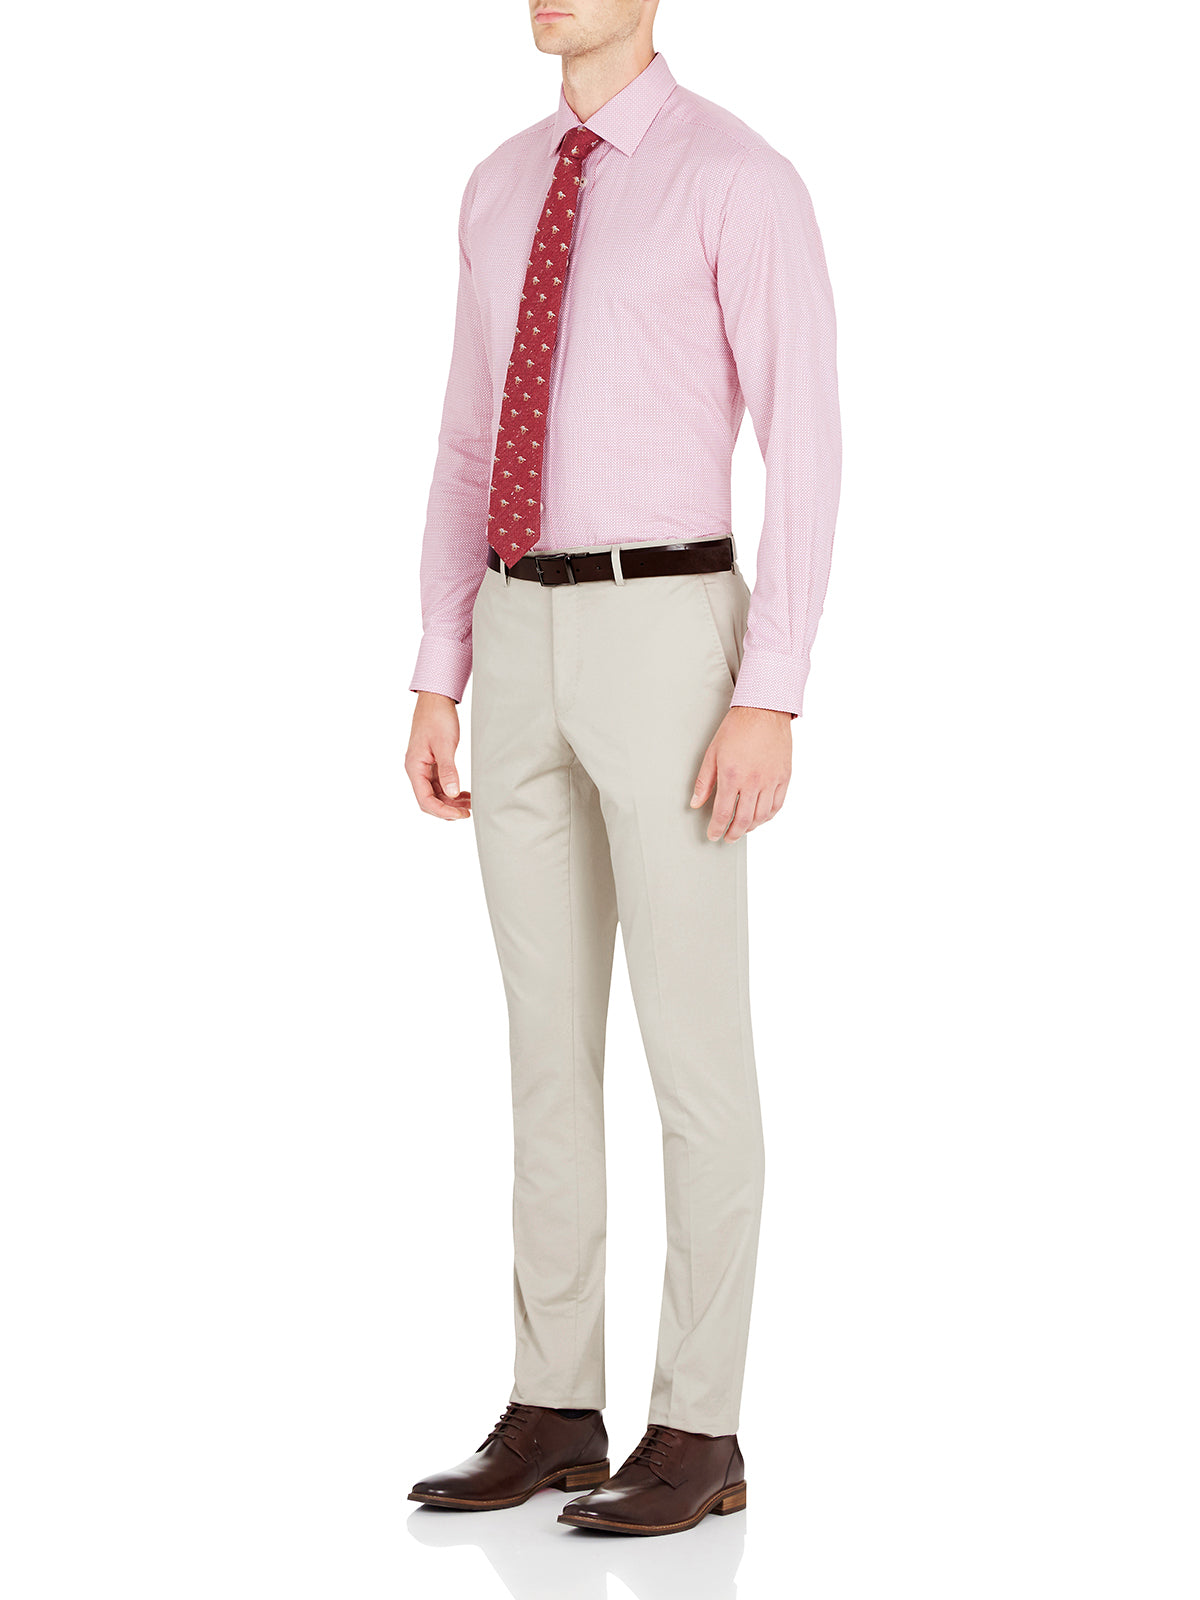 Mens Cotton Trouser Pattern  Plain at Rs 430  Piece in Hyderabad  NEXT  GARMENT DISTRIBUTION